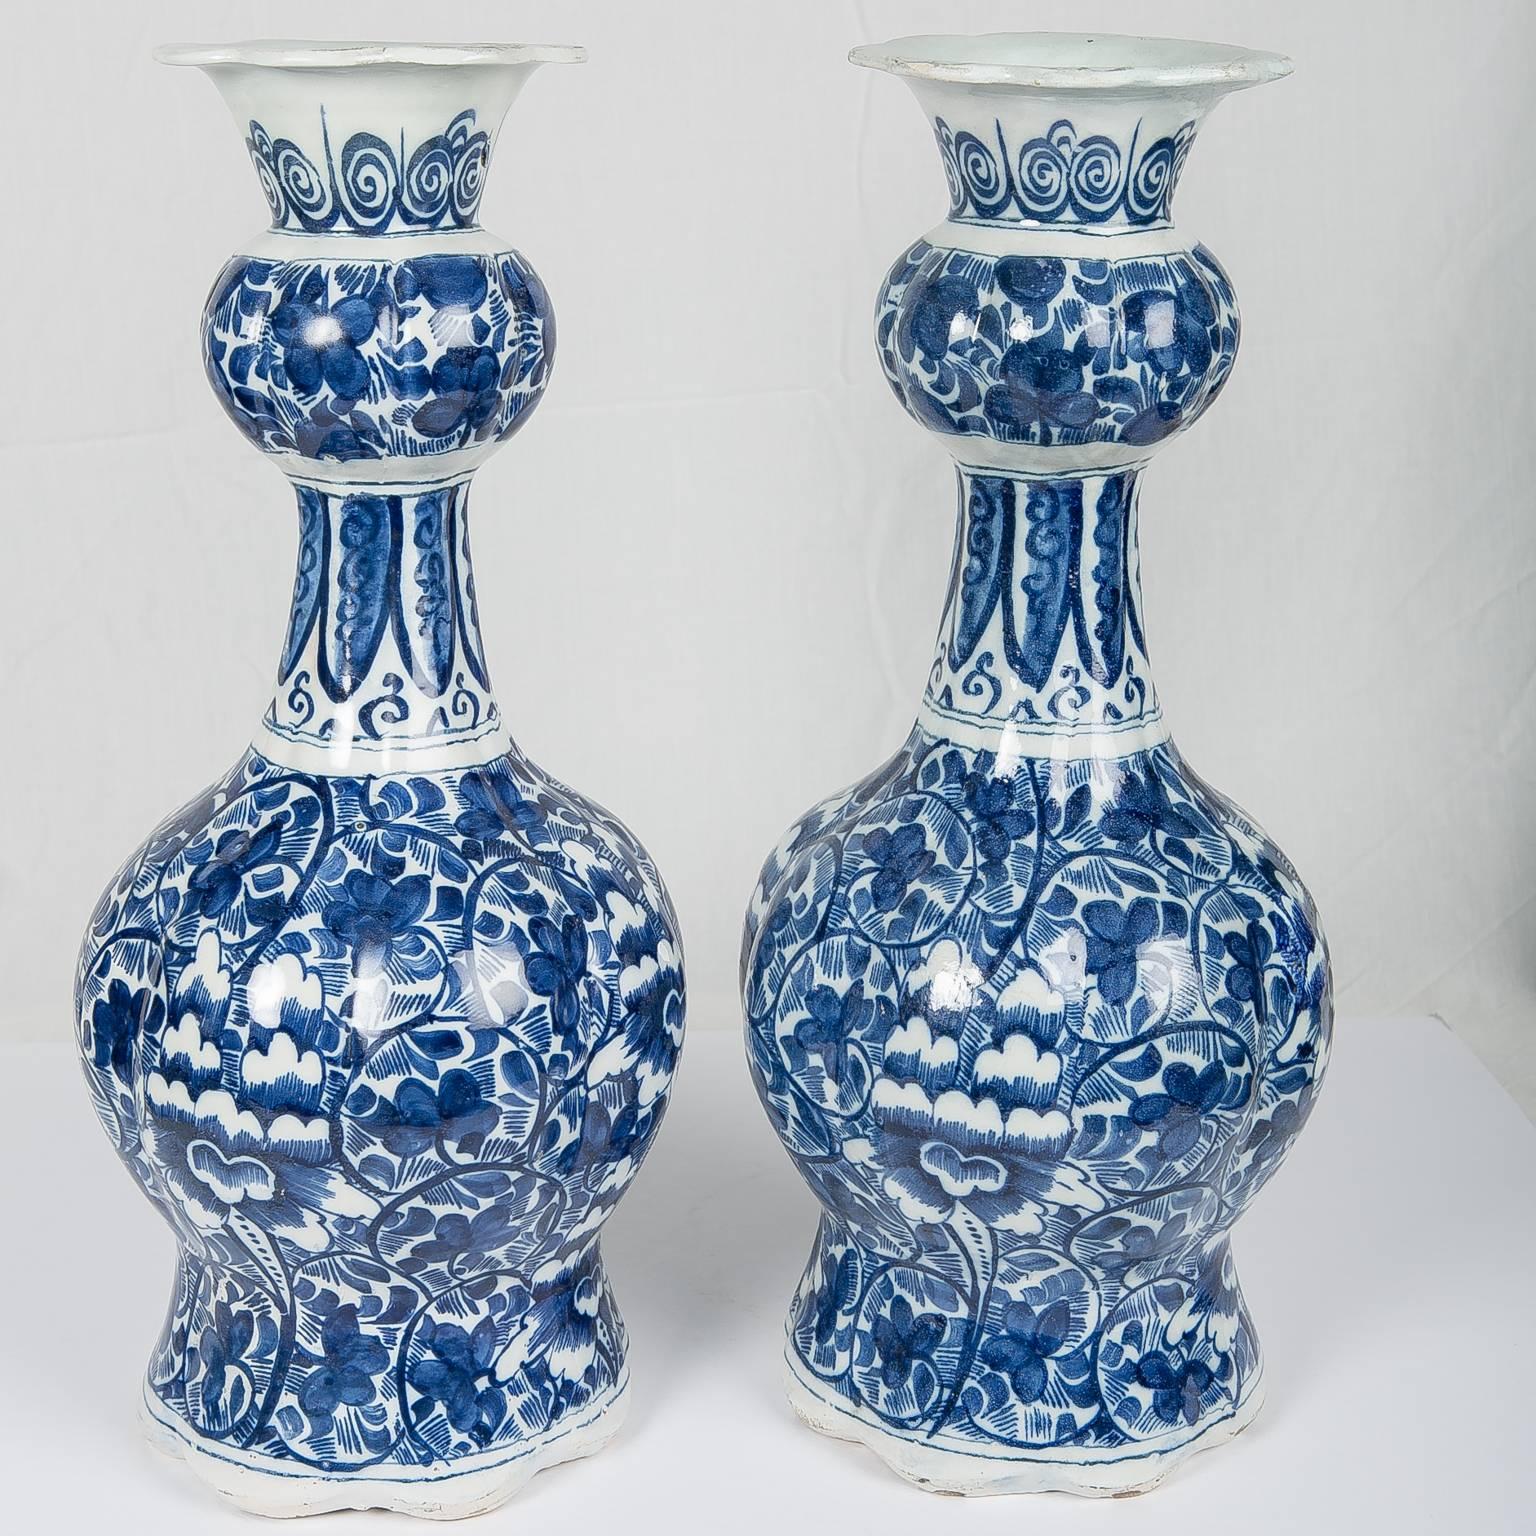 A pair of 18th century blue and white Dutch gourd shaped vases molded with delicate octagonal lobes. Made circa 1780, the Delft vases are hand-painted in deep cobalt blue with a beautiful  design of scrolling vines and flowers. The neck of each vase